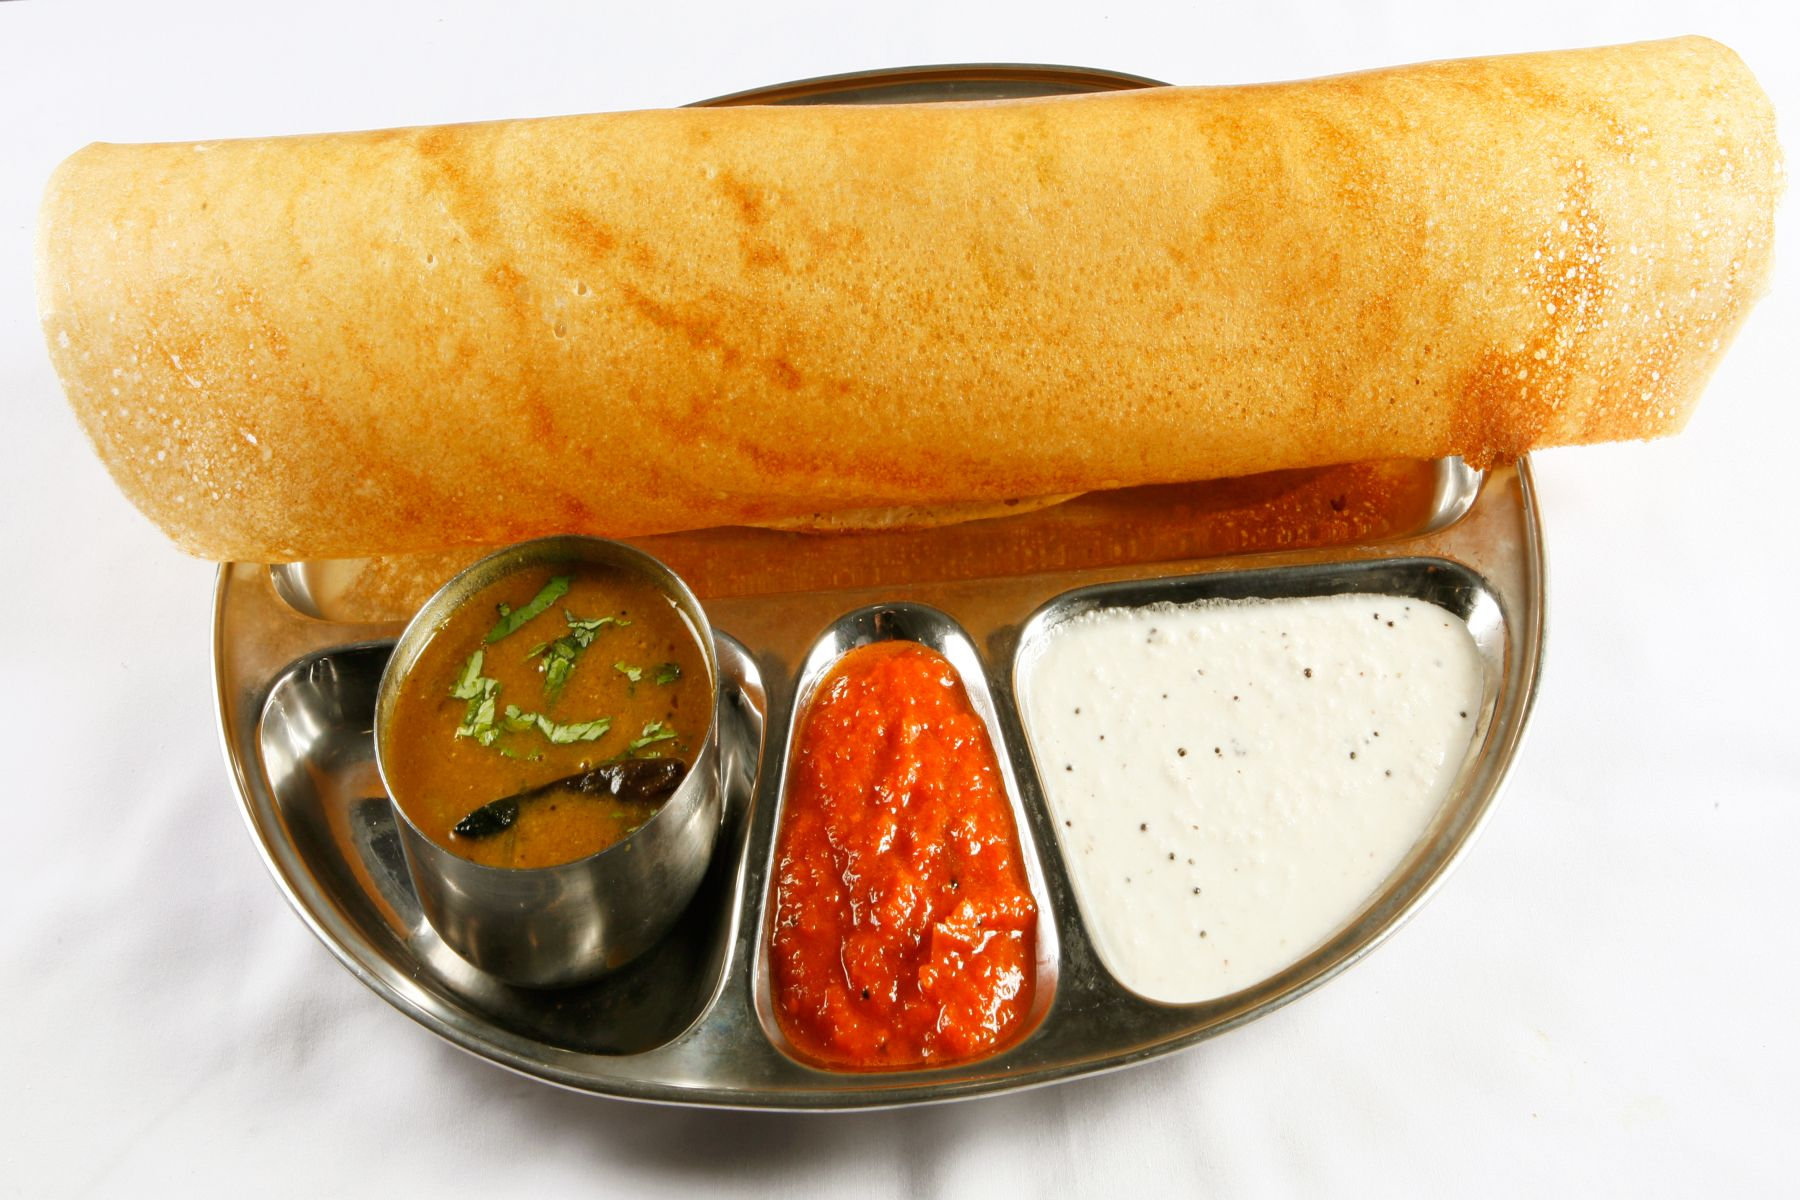 Crispy Masala Dosa with Flavorful Filling